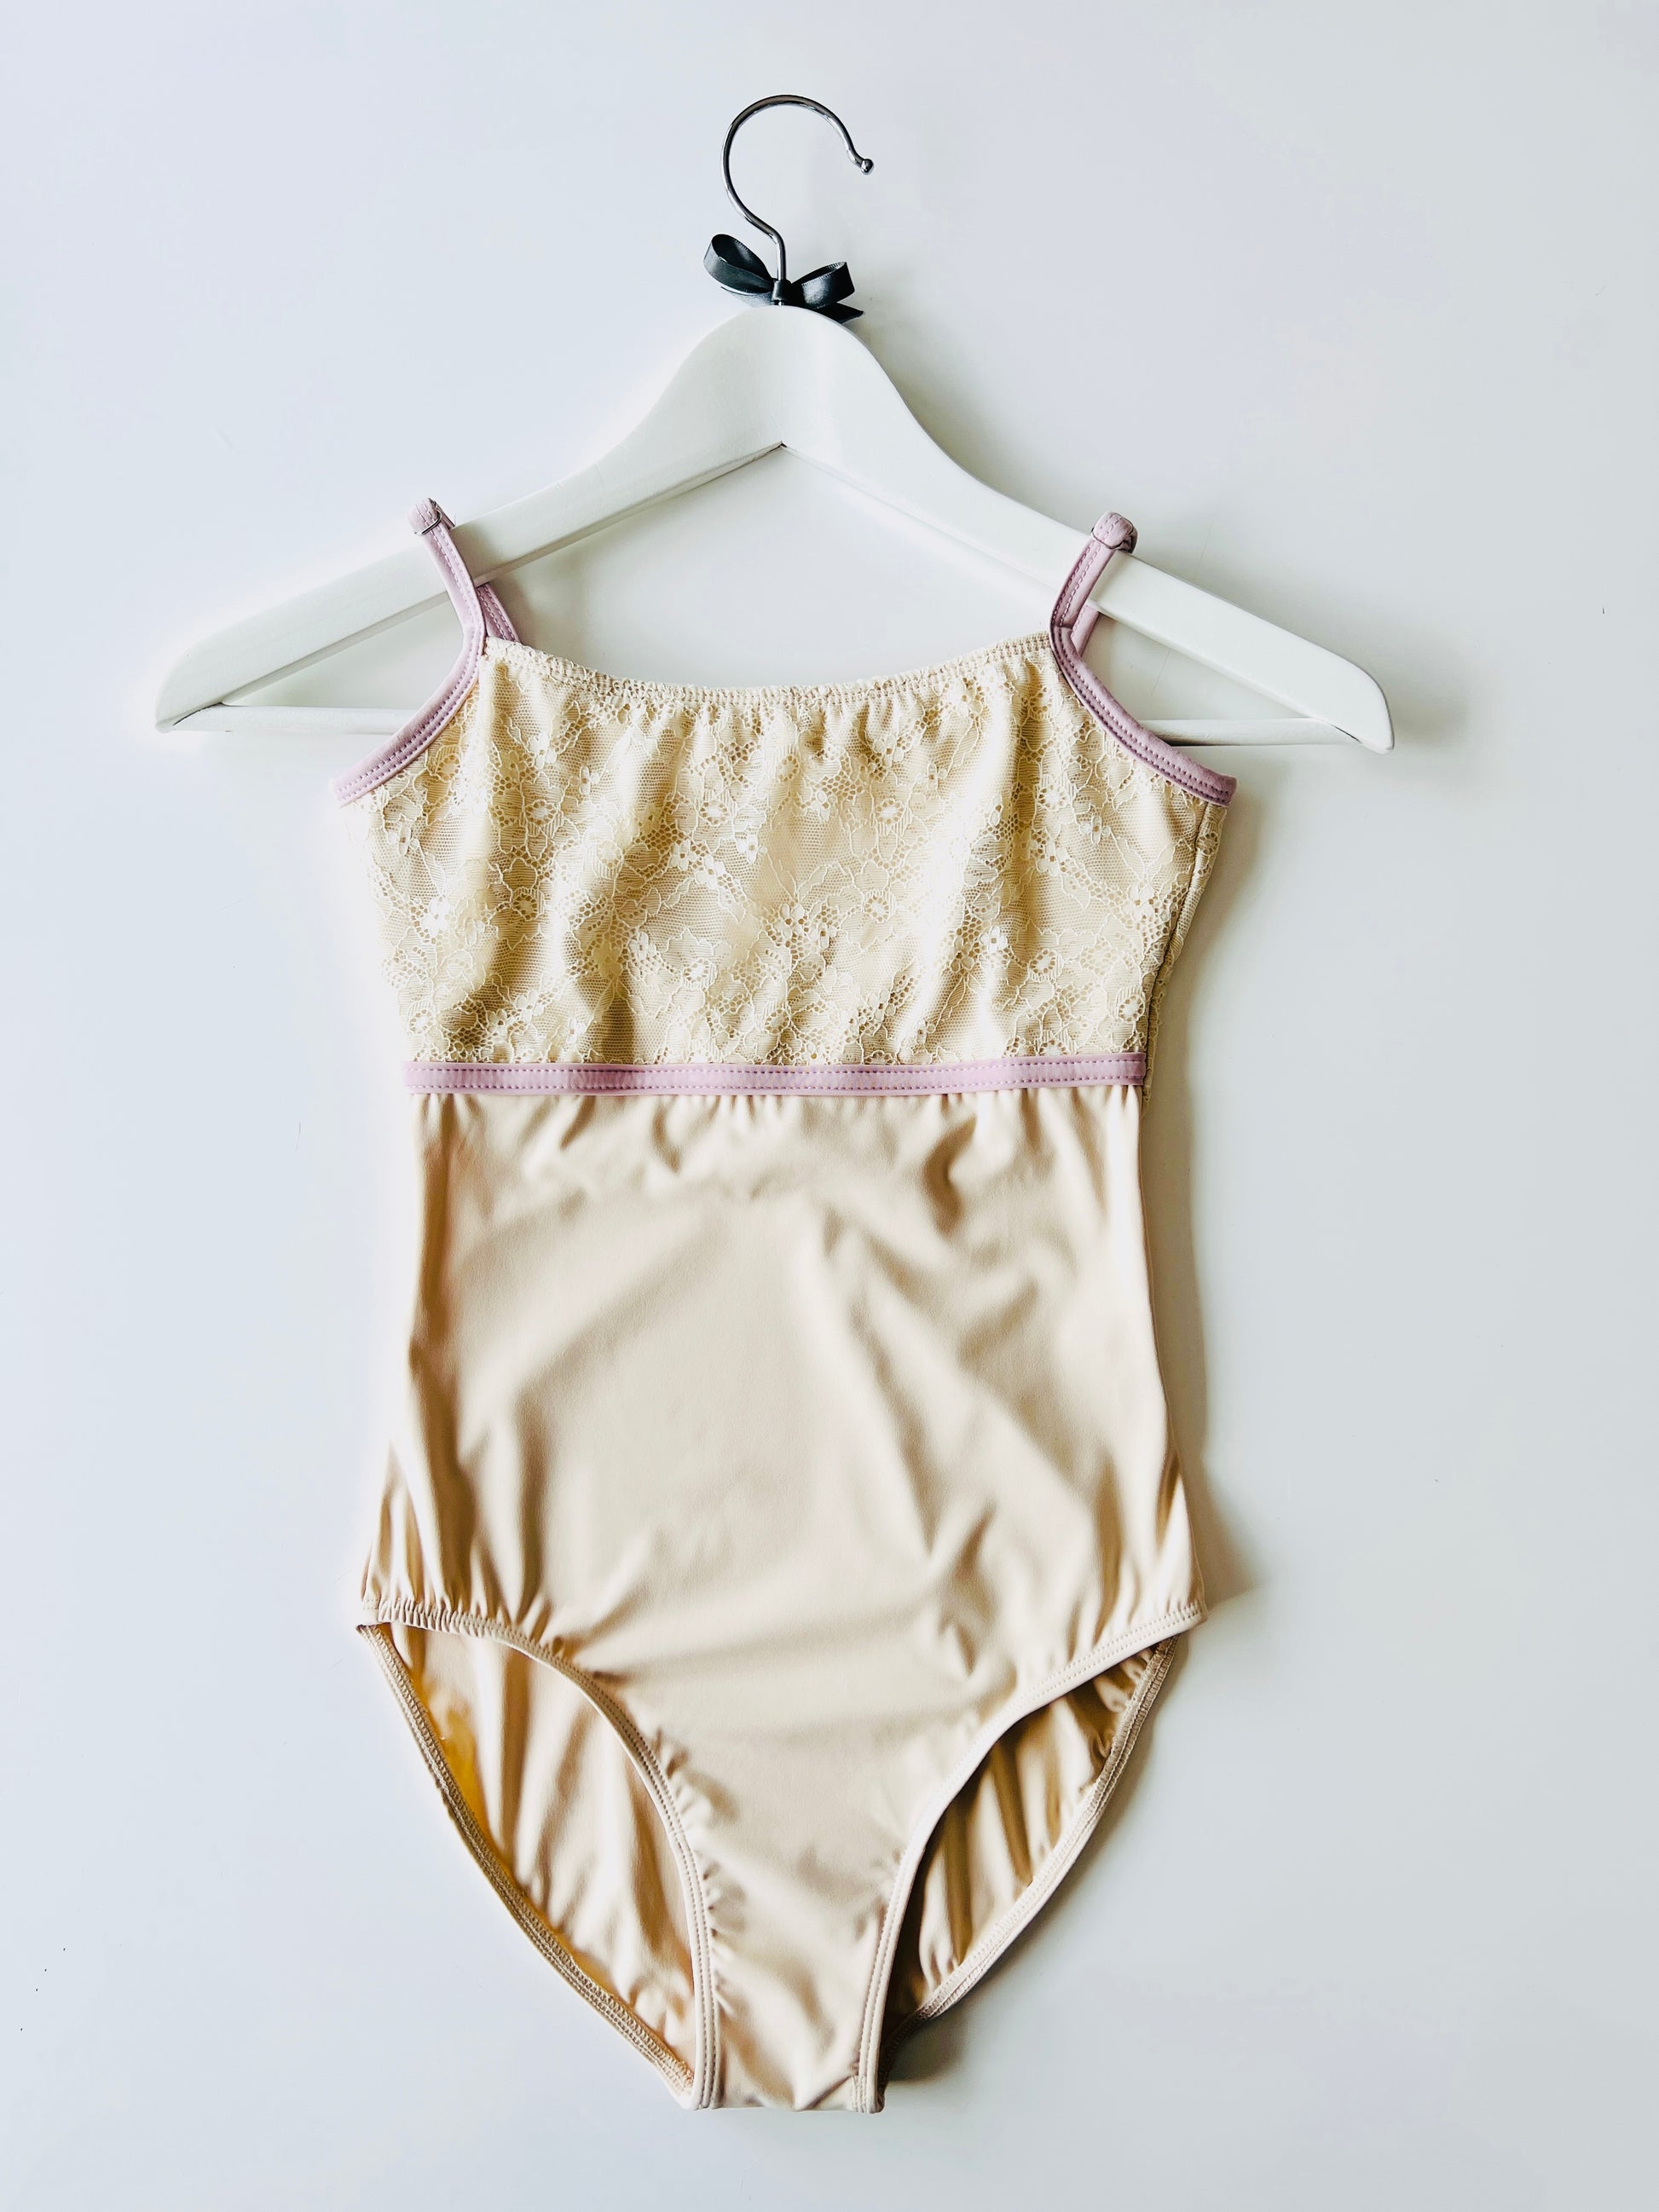 Lace top ballet leotard in cream  and contrasting lilac from The Collective Dancewear